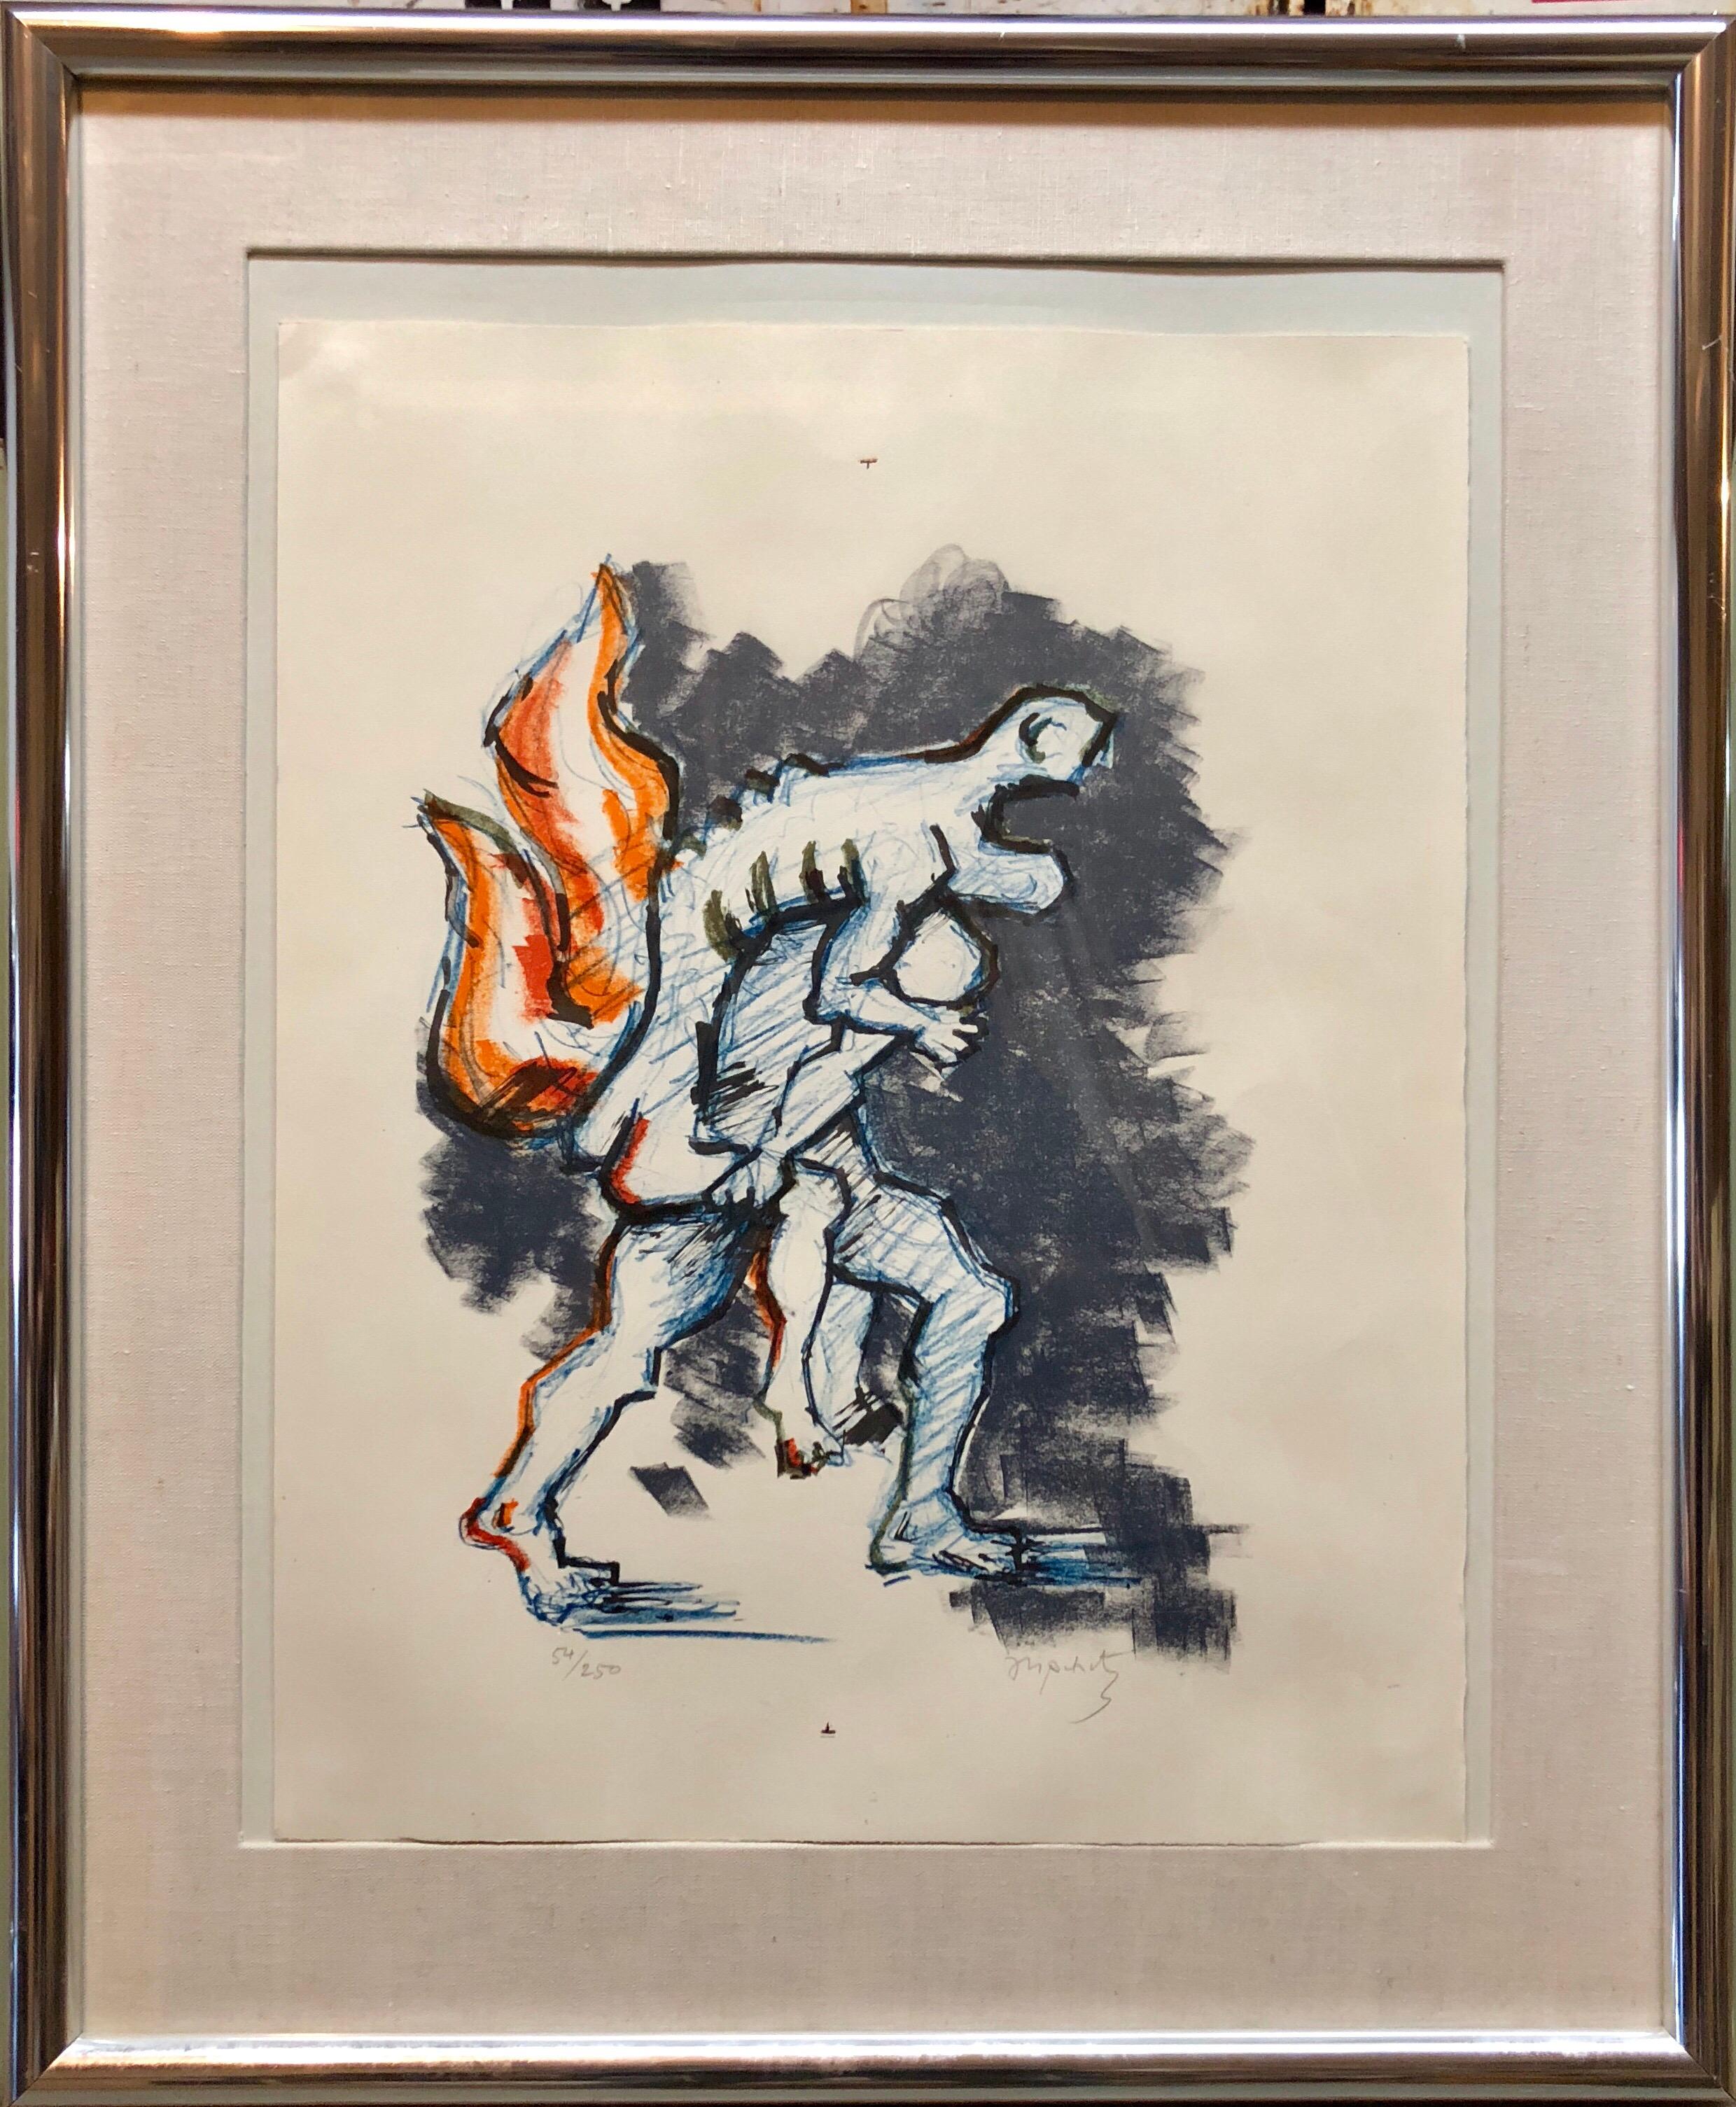 Lithuanian French Cubist Modernist Lithograph 